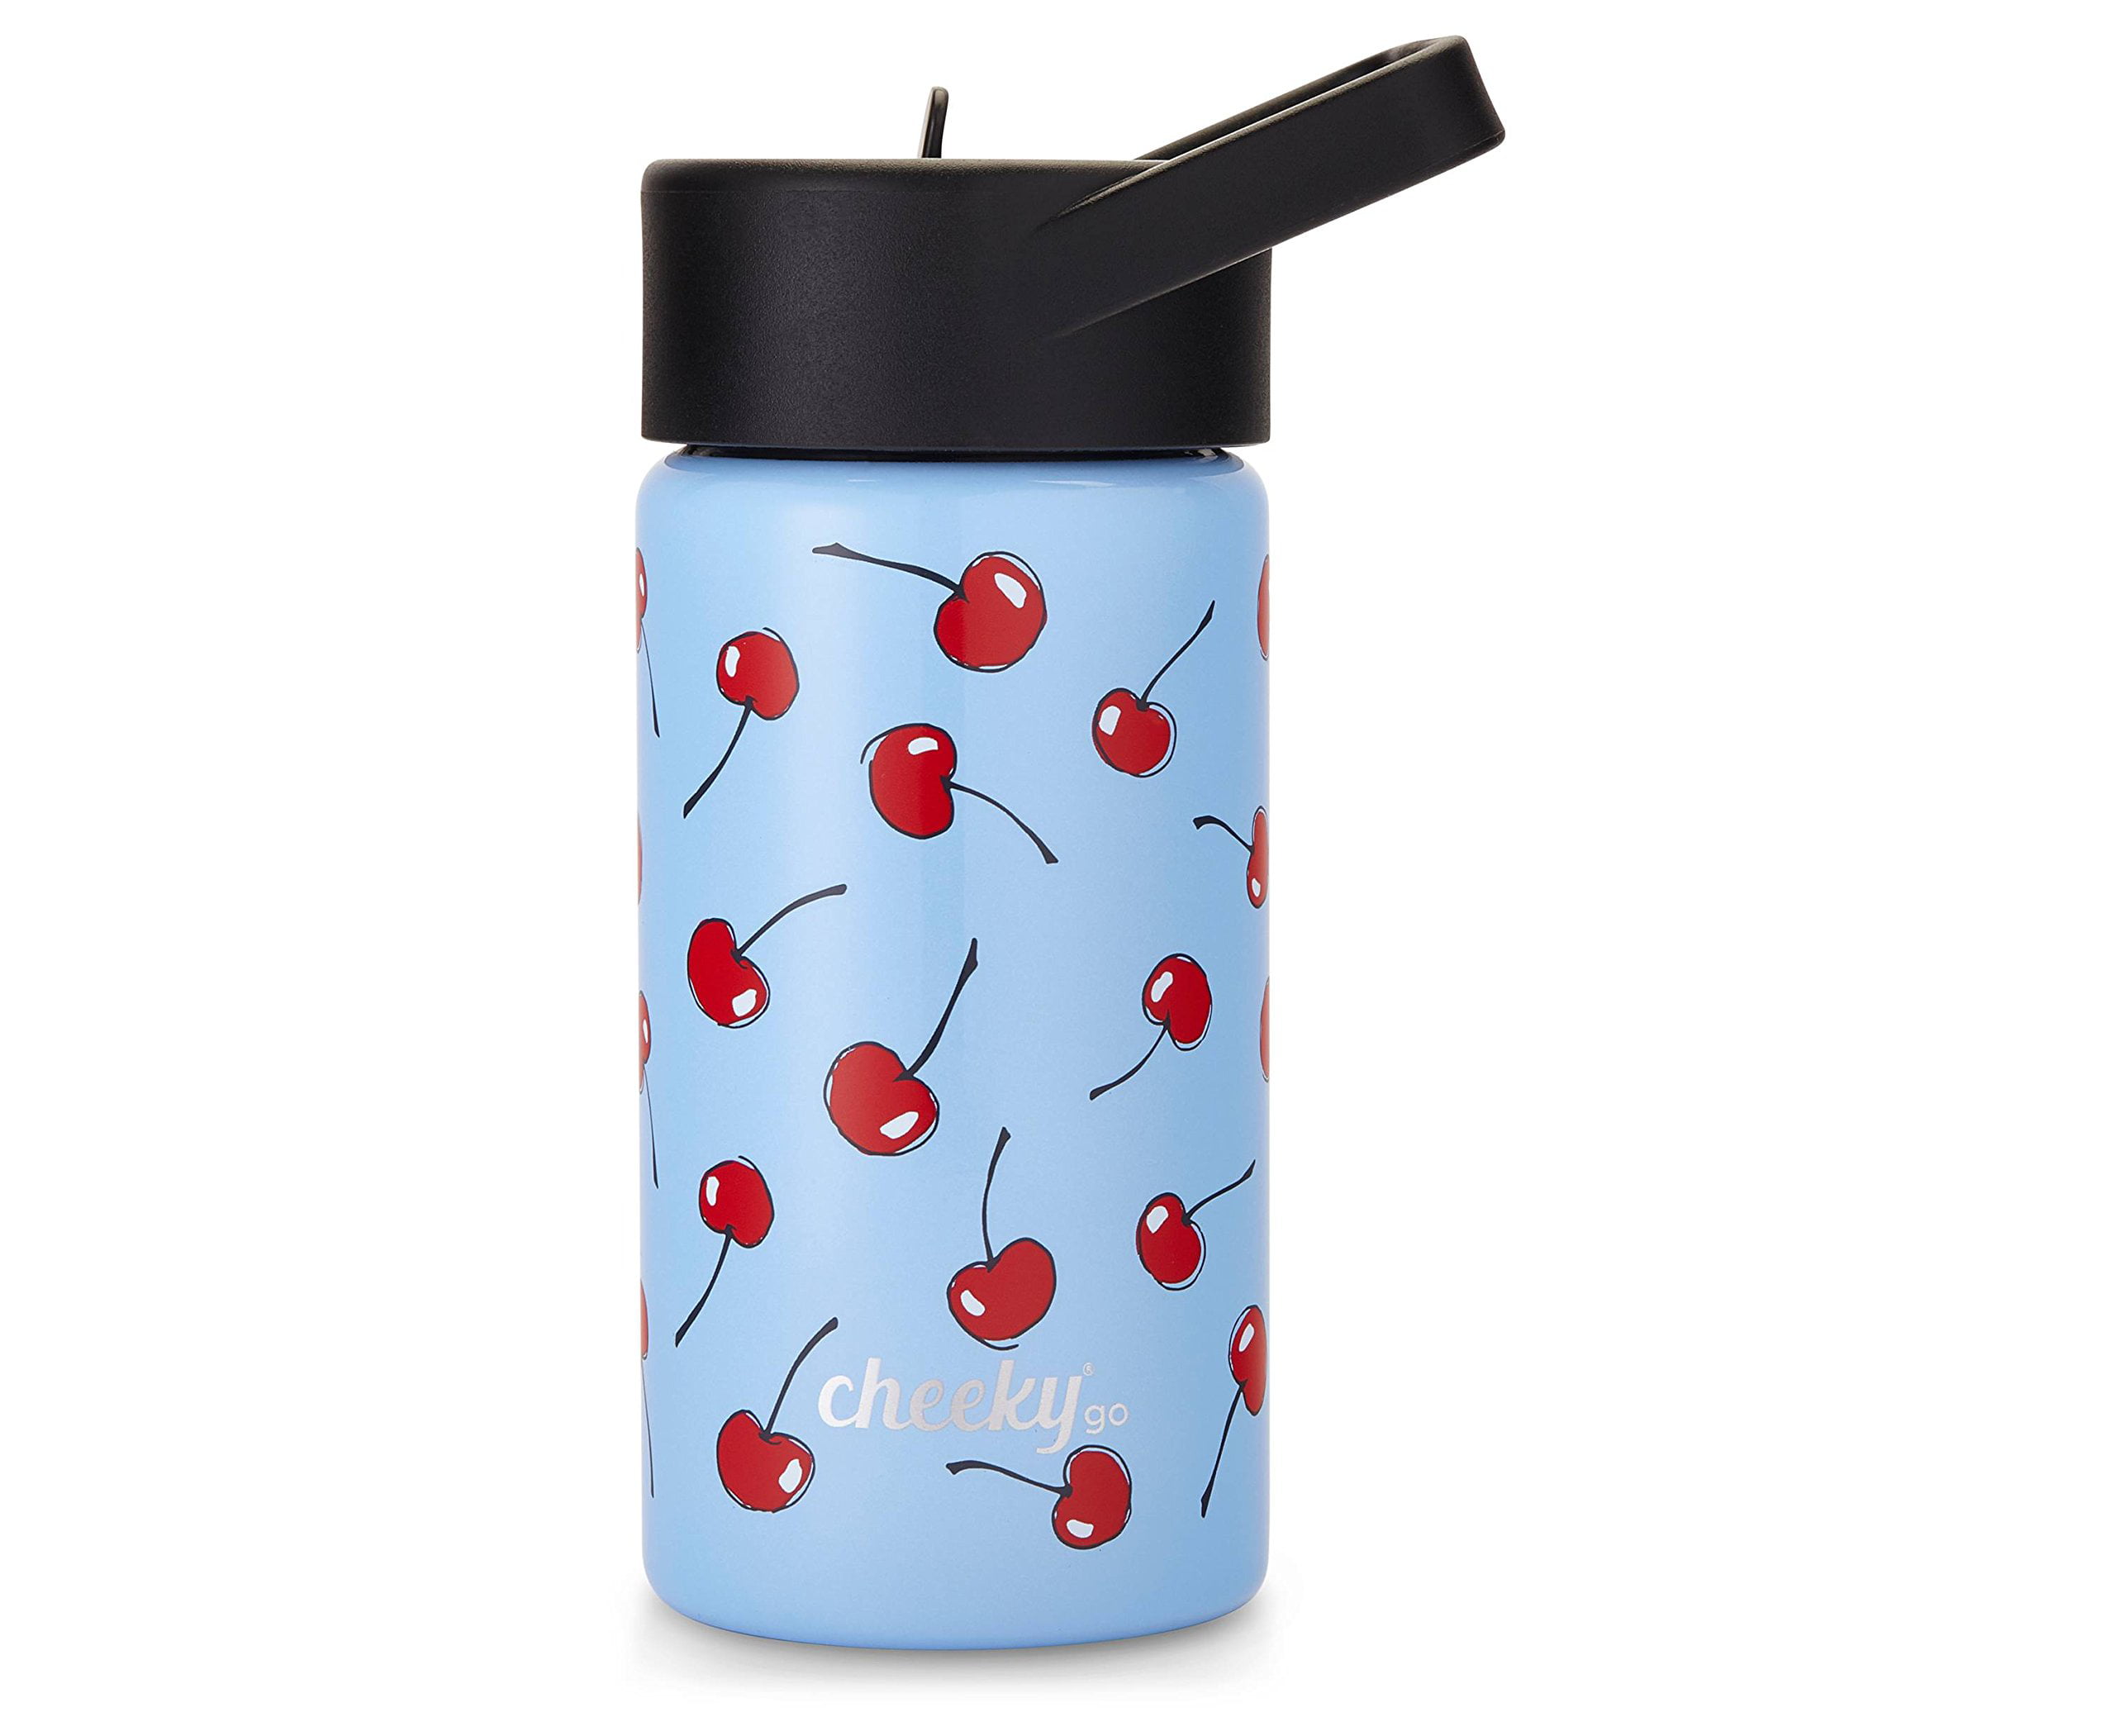 Cheeky Kids Go 14oz Insulated Stainless Steel Blue Water Bottle with Straw Lid 